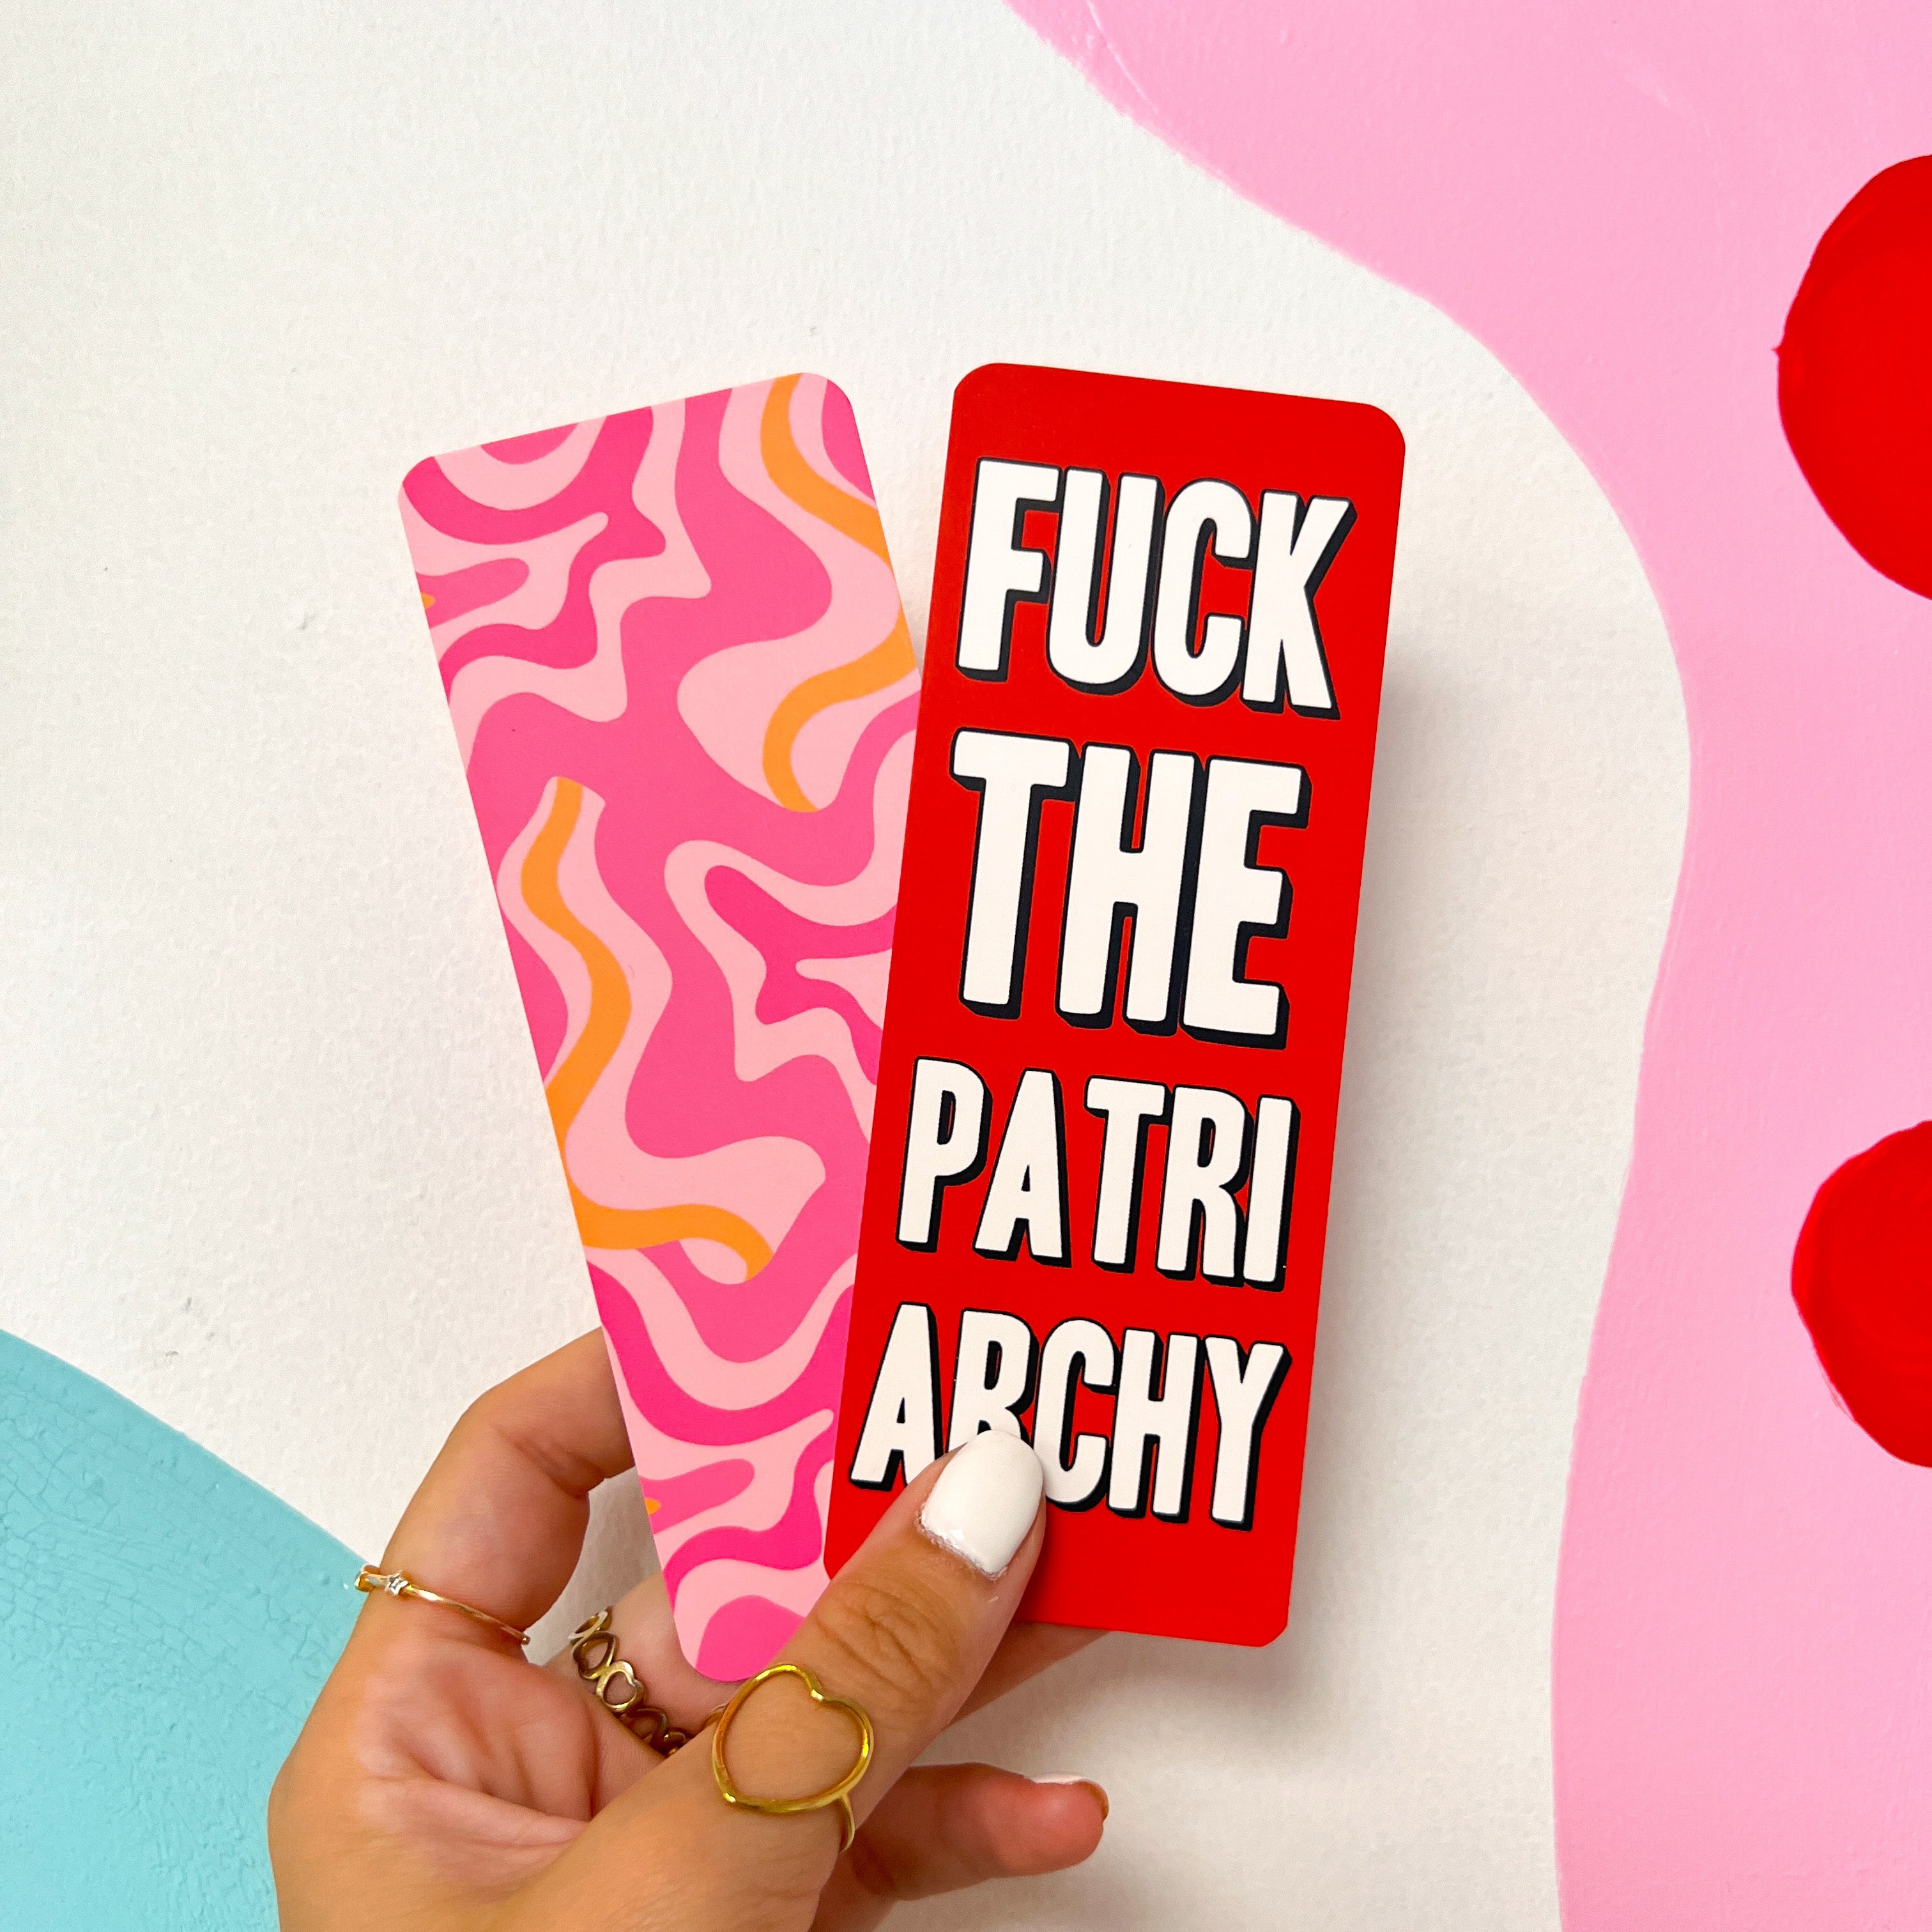 F*ck the patriarchy bookmark 2x pack